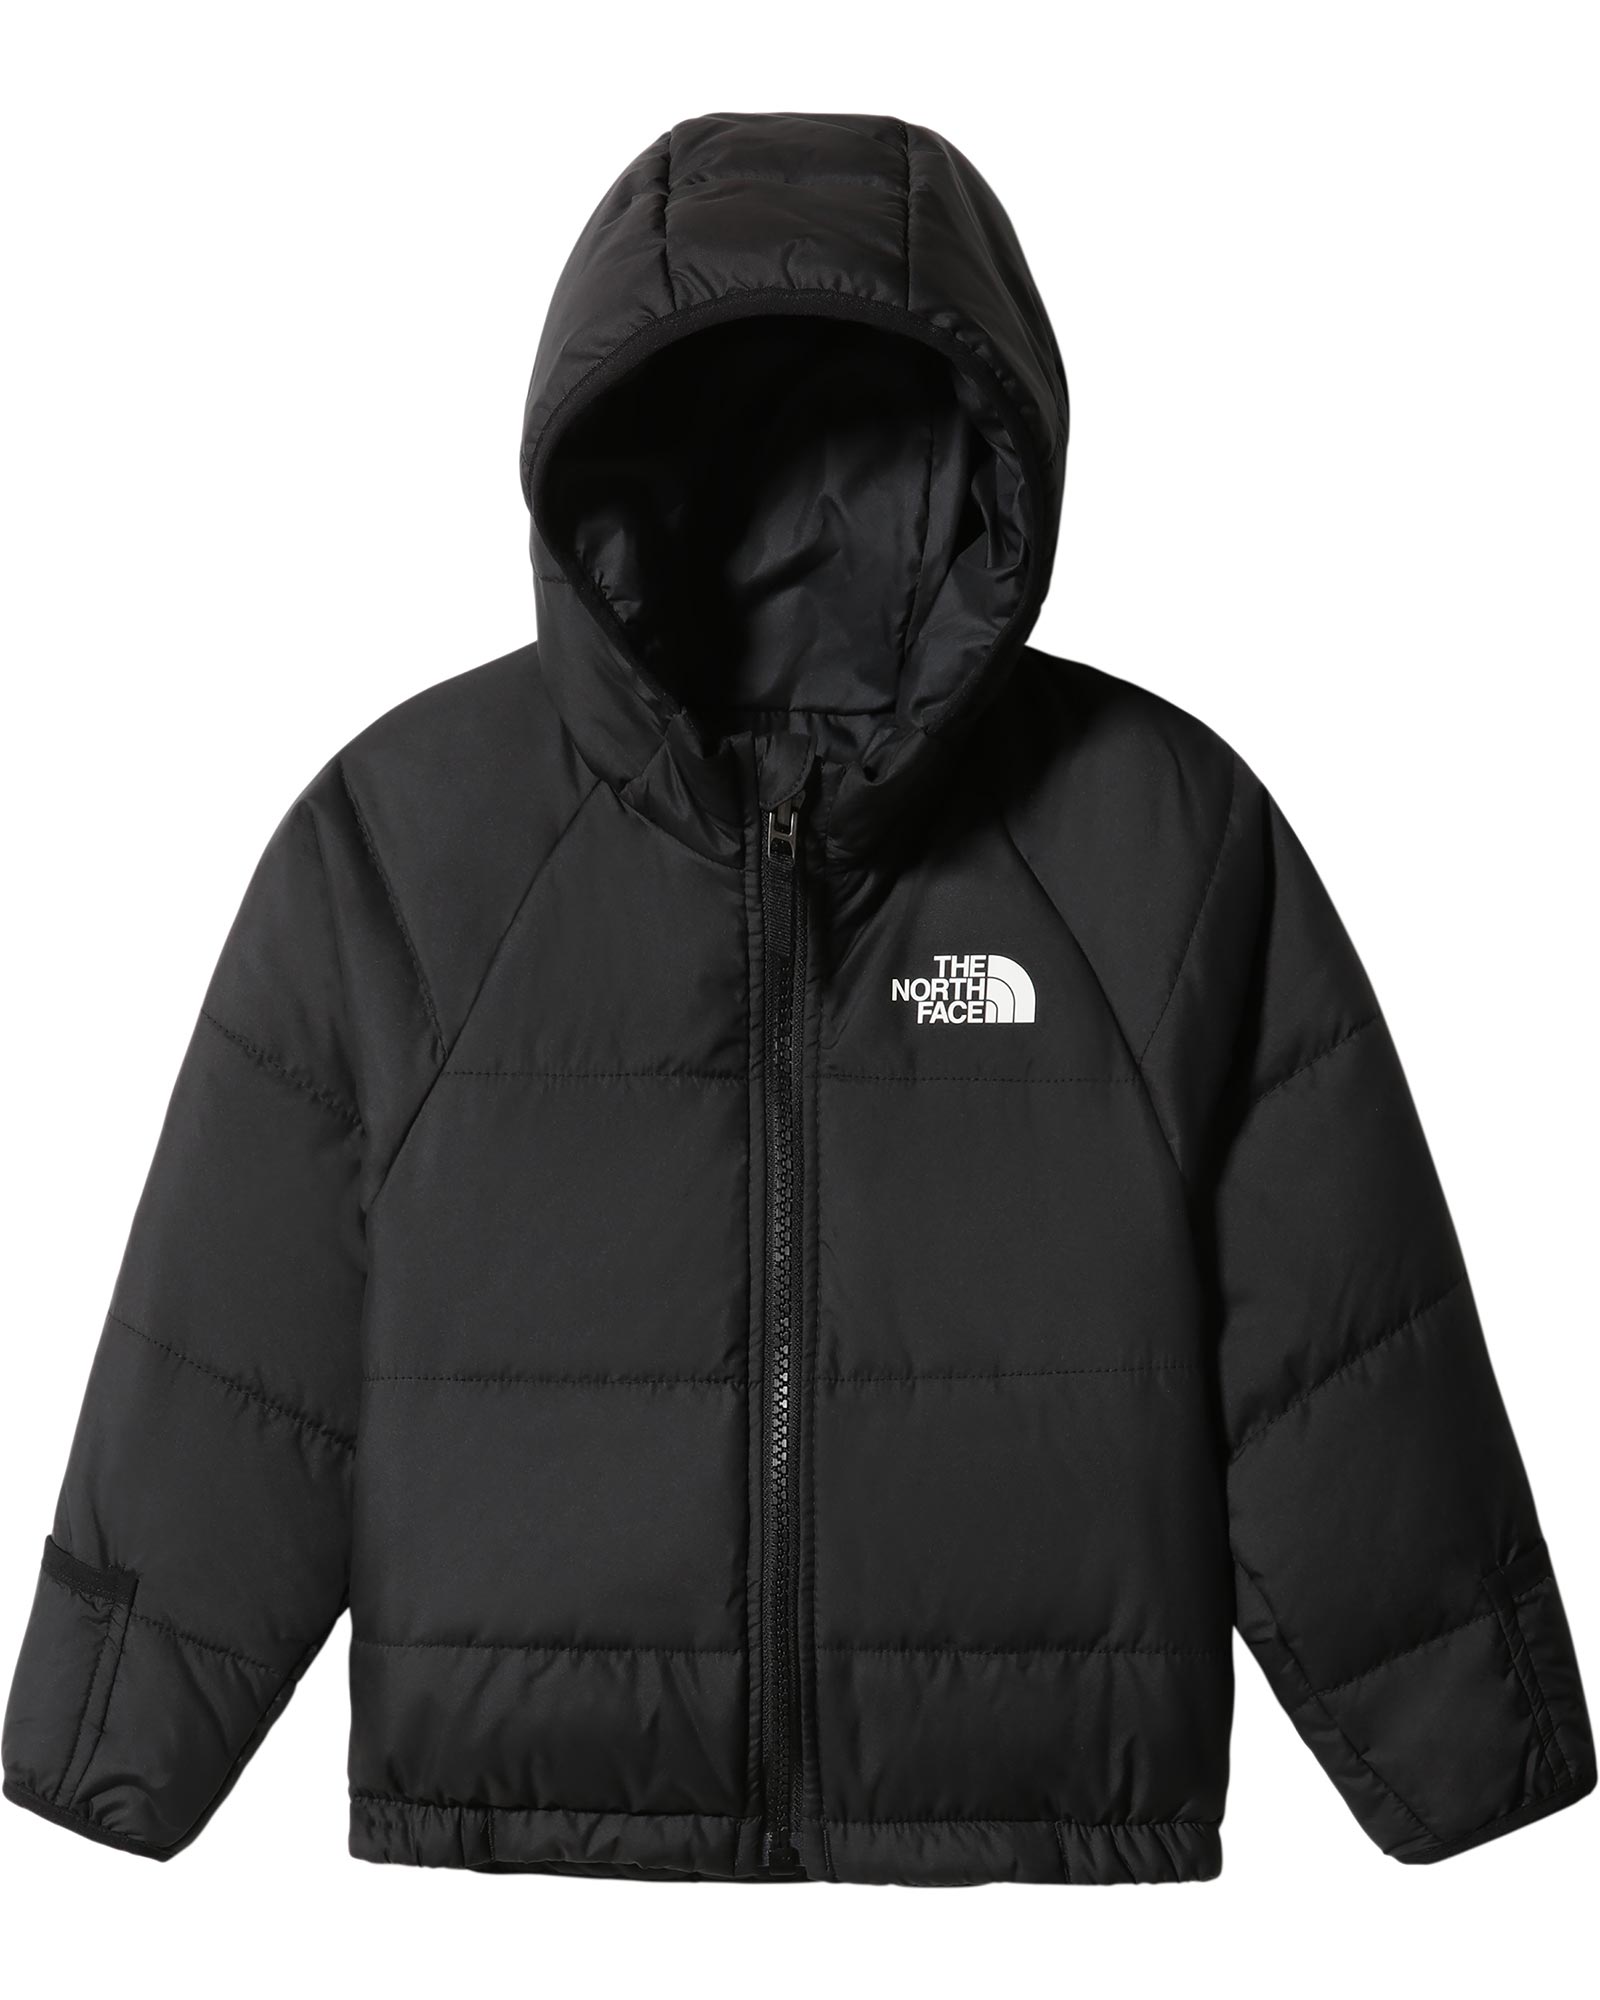 The North Face Reversible Perrito Infant Jacket